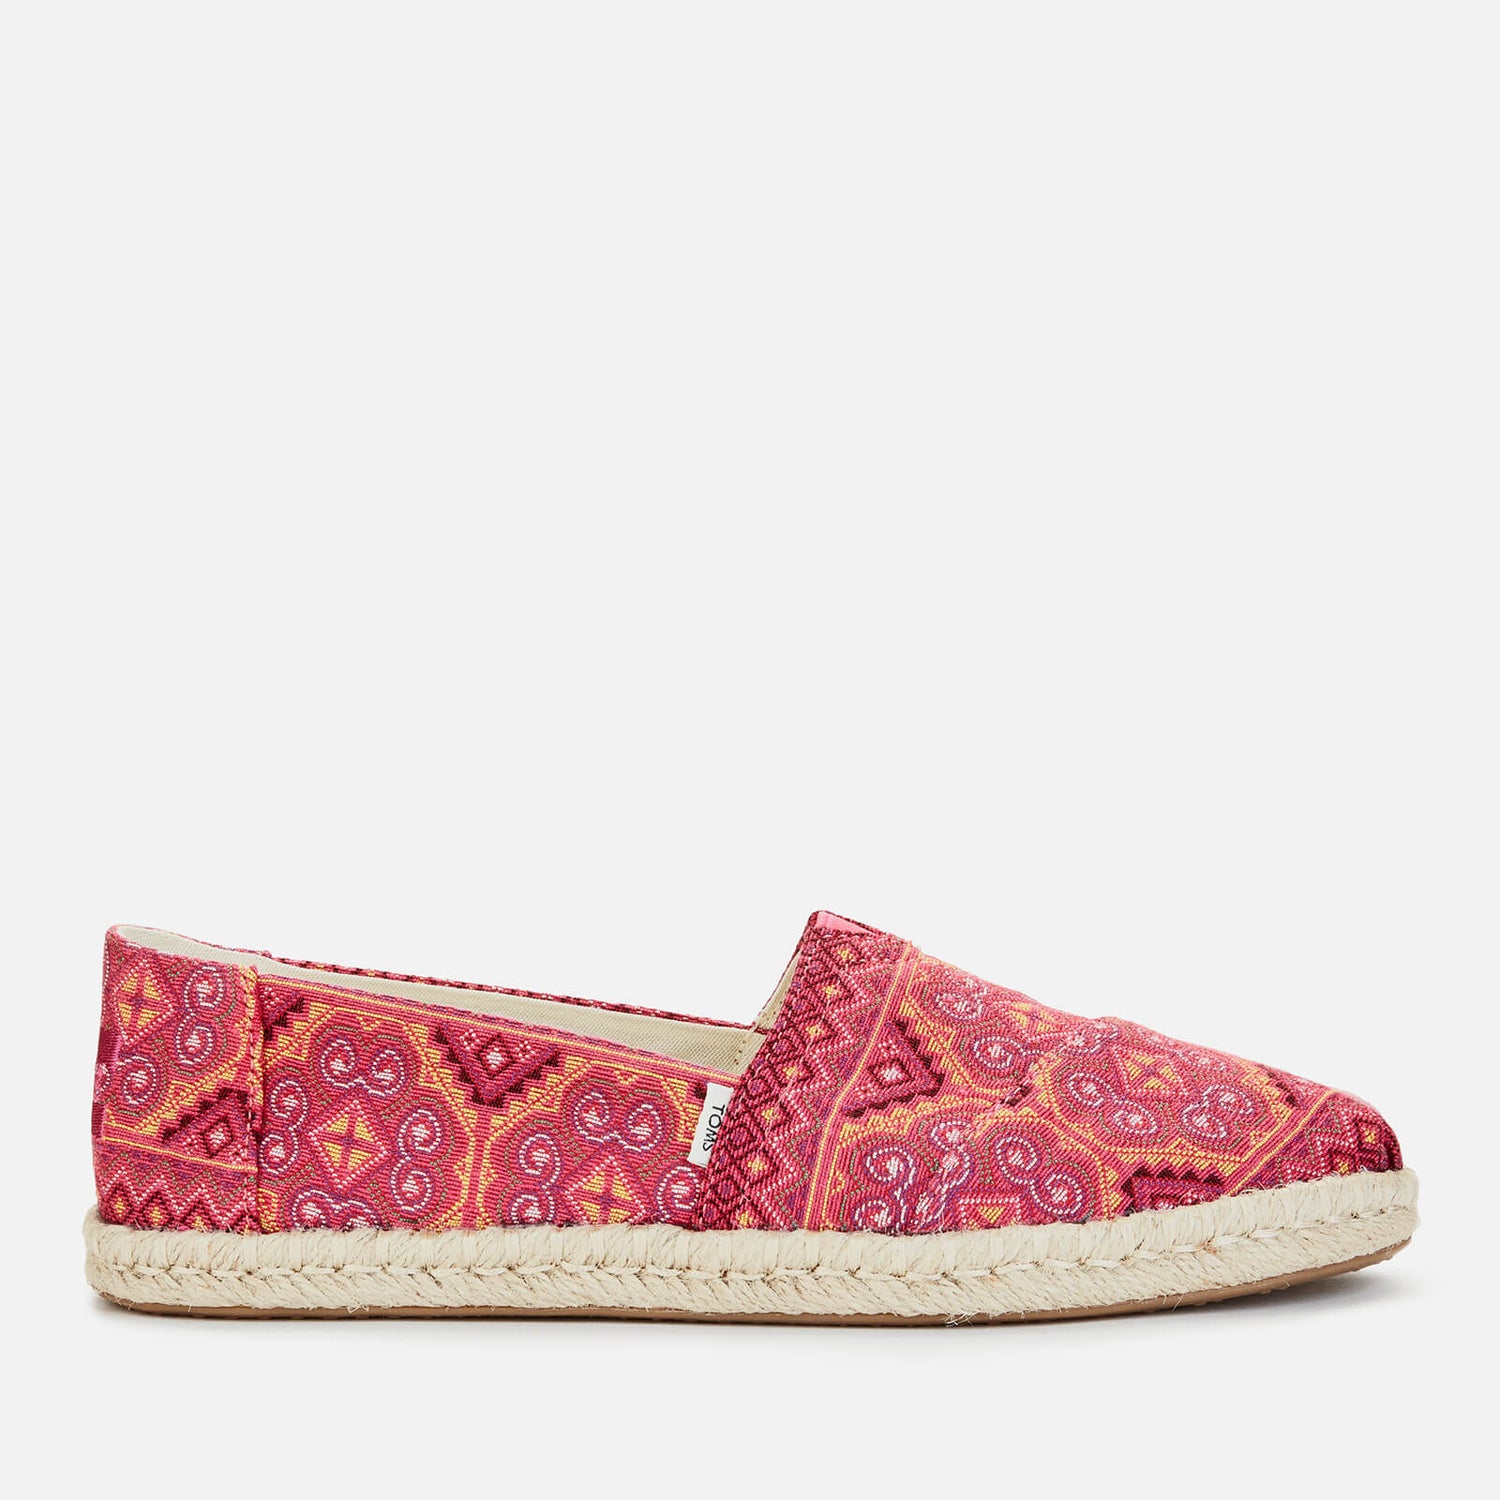 TOMS Women's Rope Espadrilles - Pink Multi Floral Woven | FREE UK Delivery | Allsole